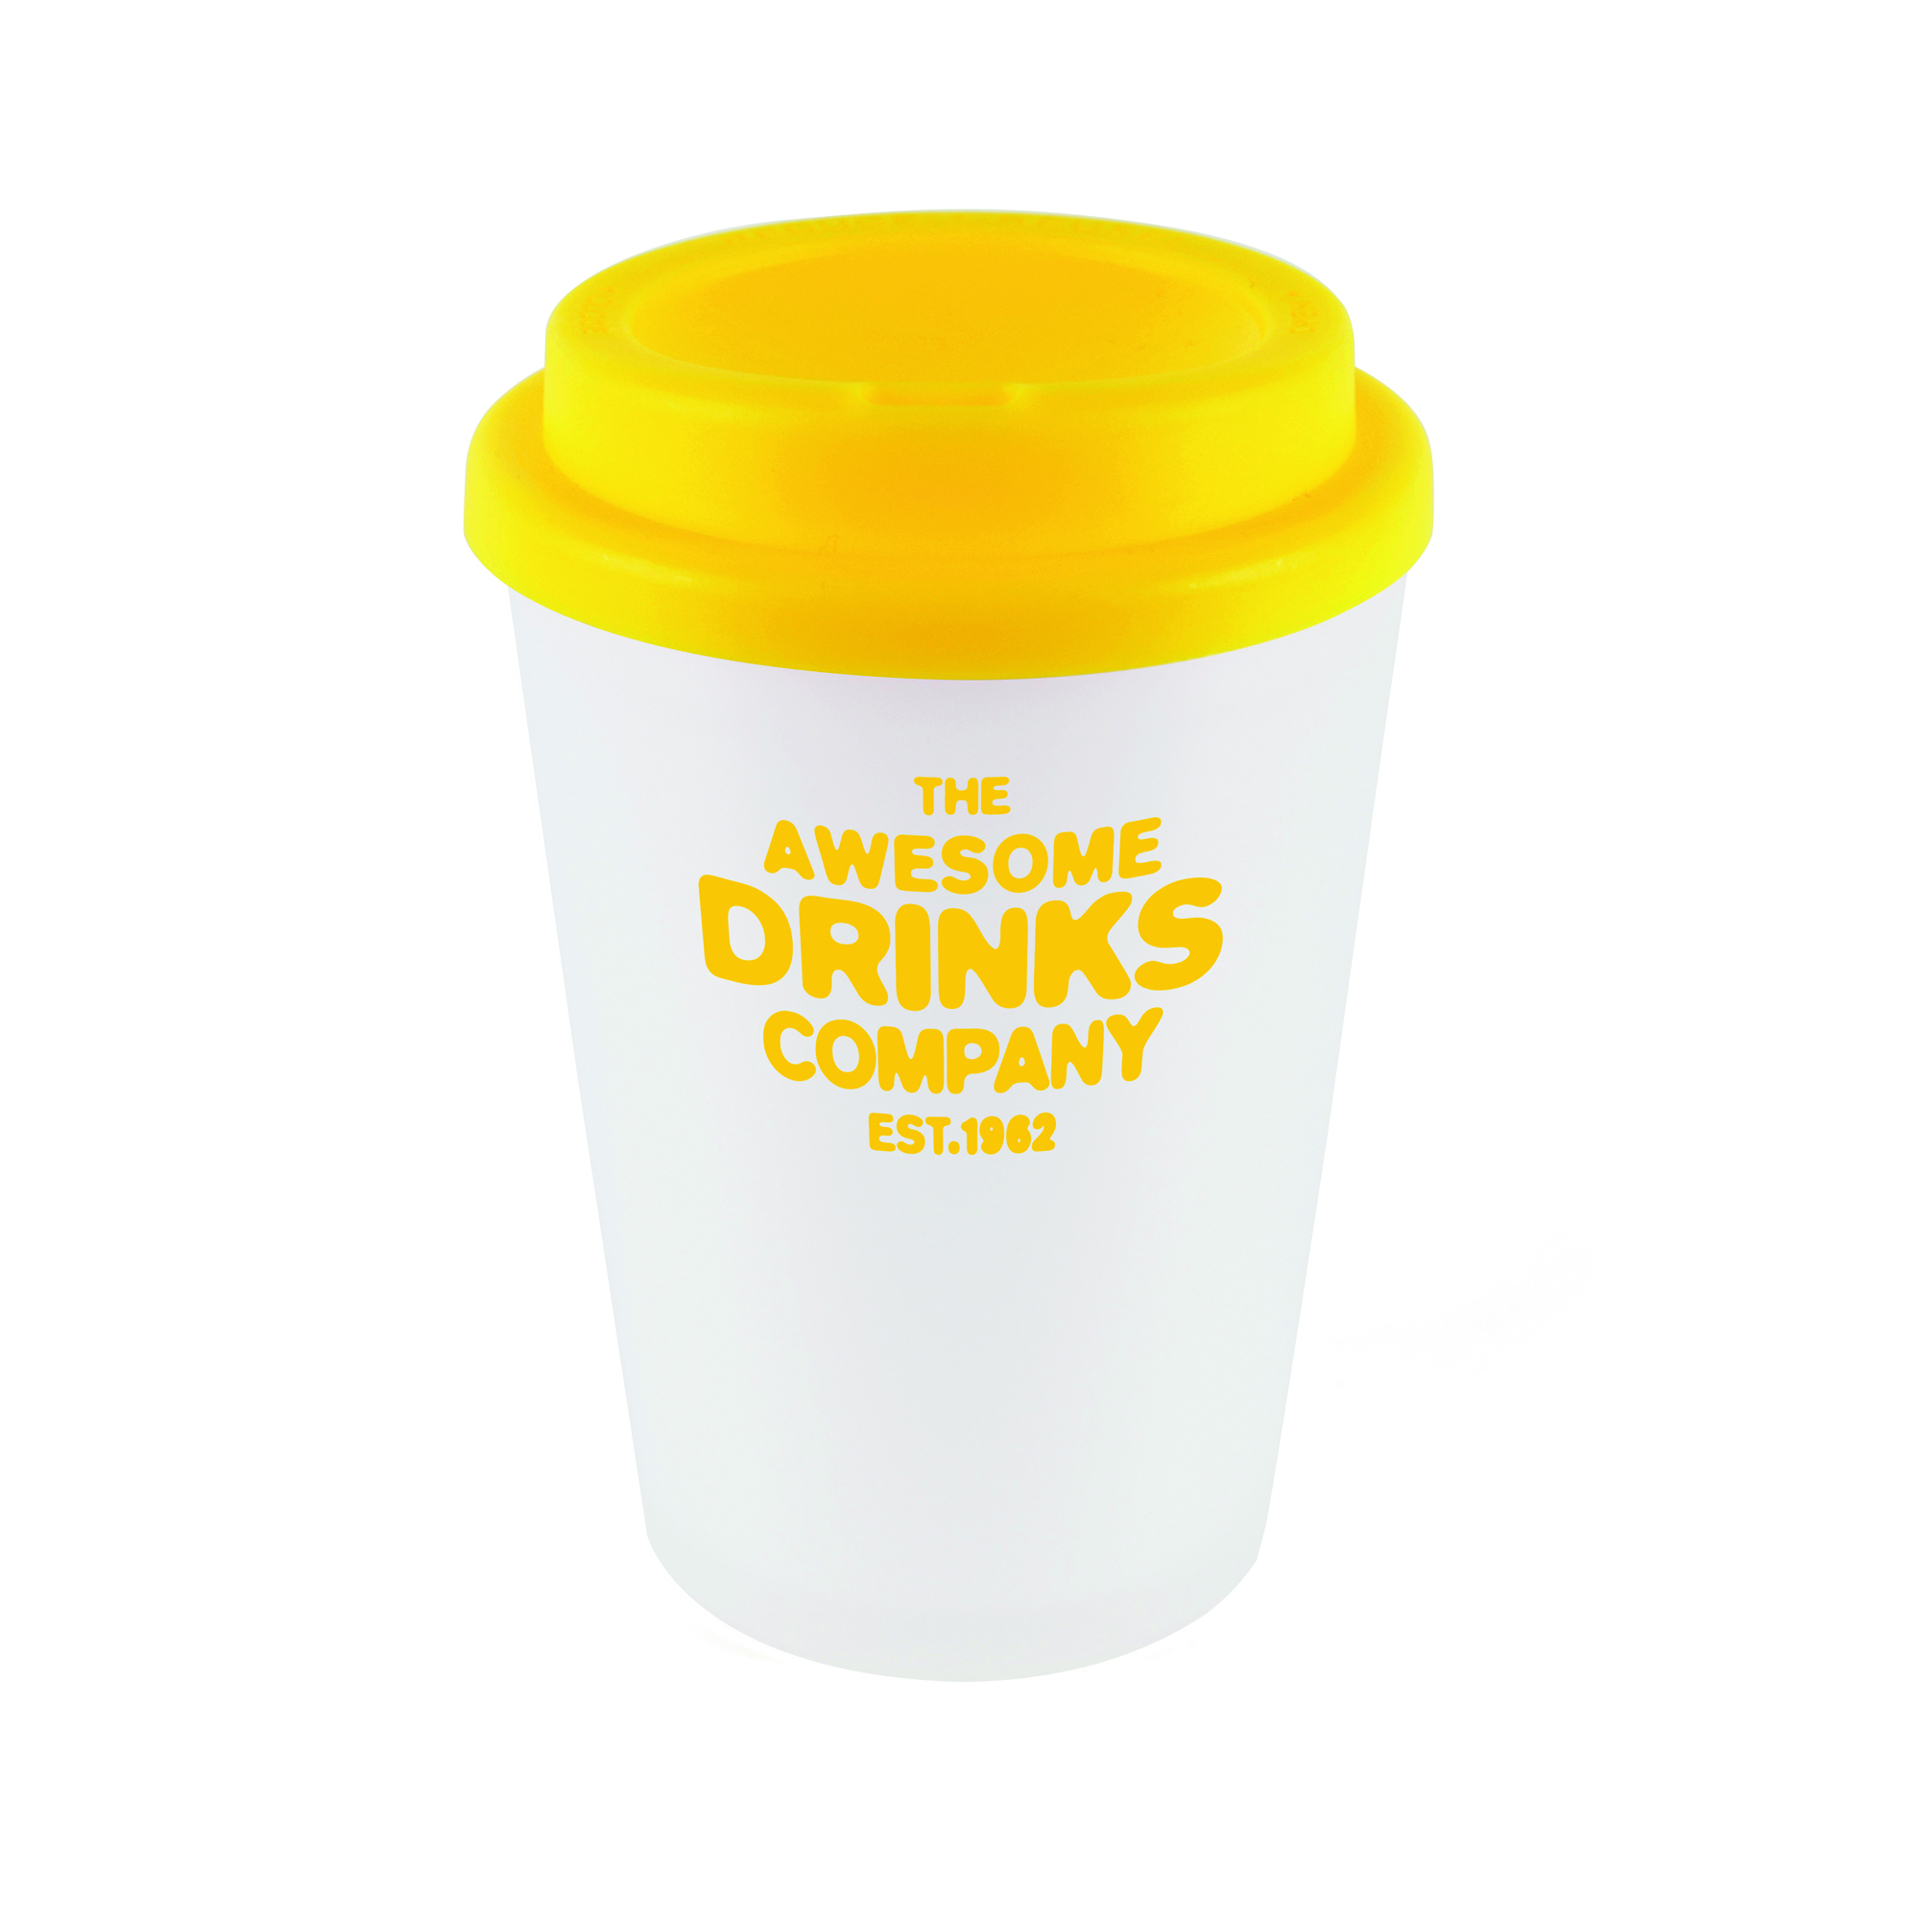 Reusable coffee cup in white, with branding area for a company logo